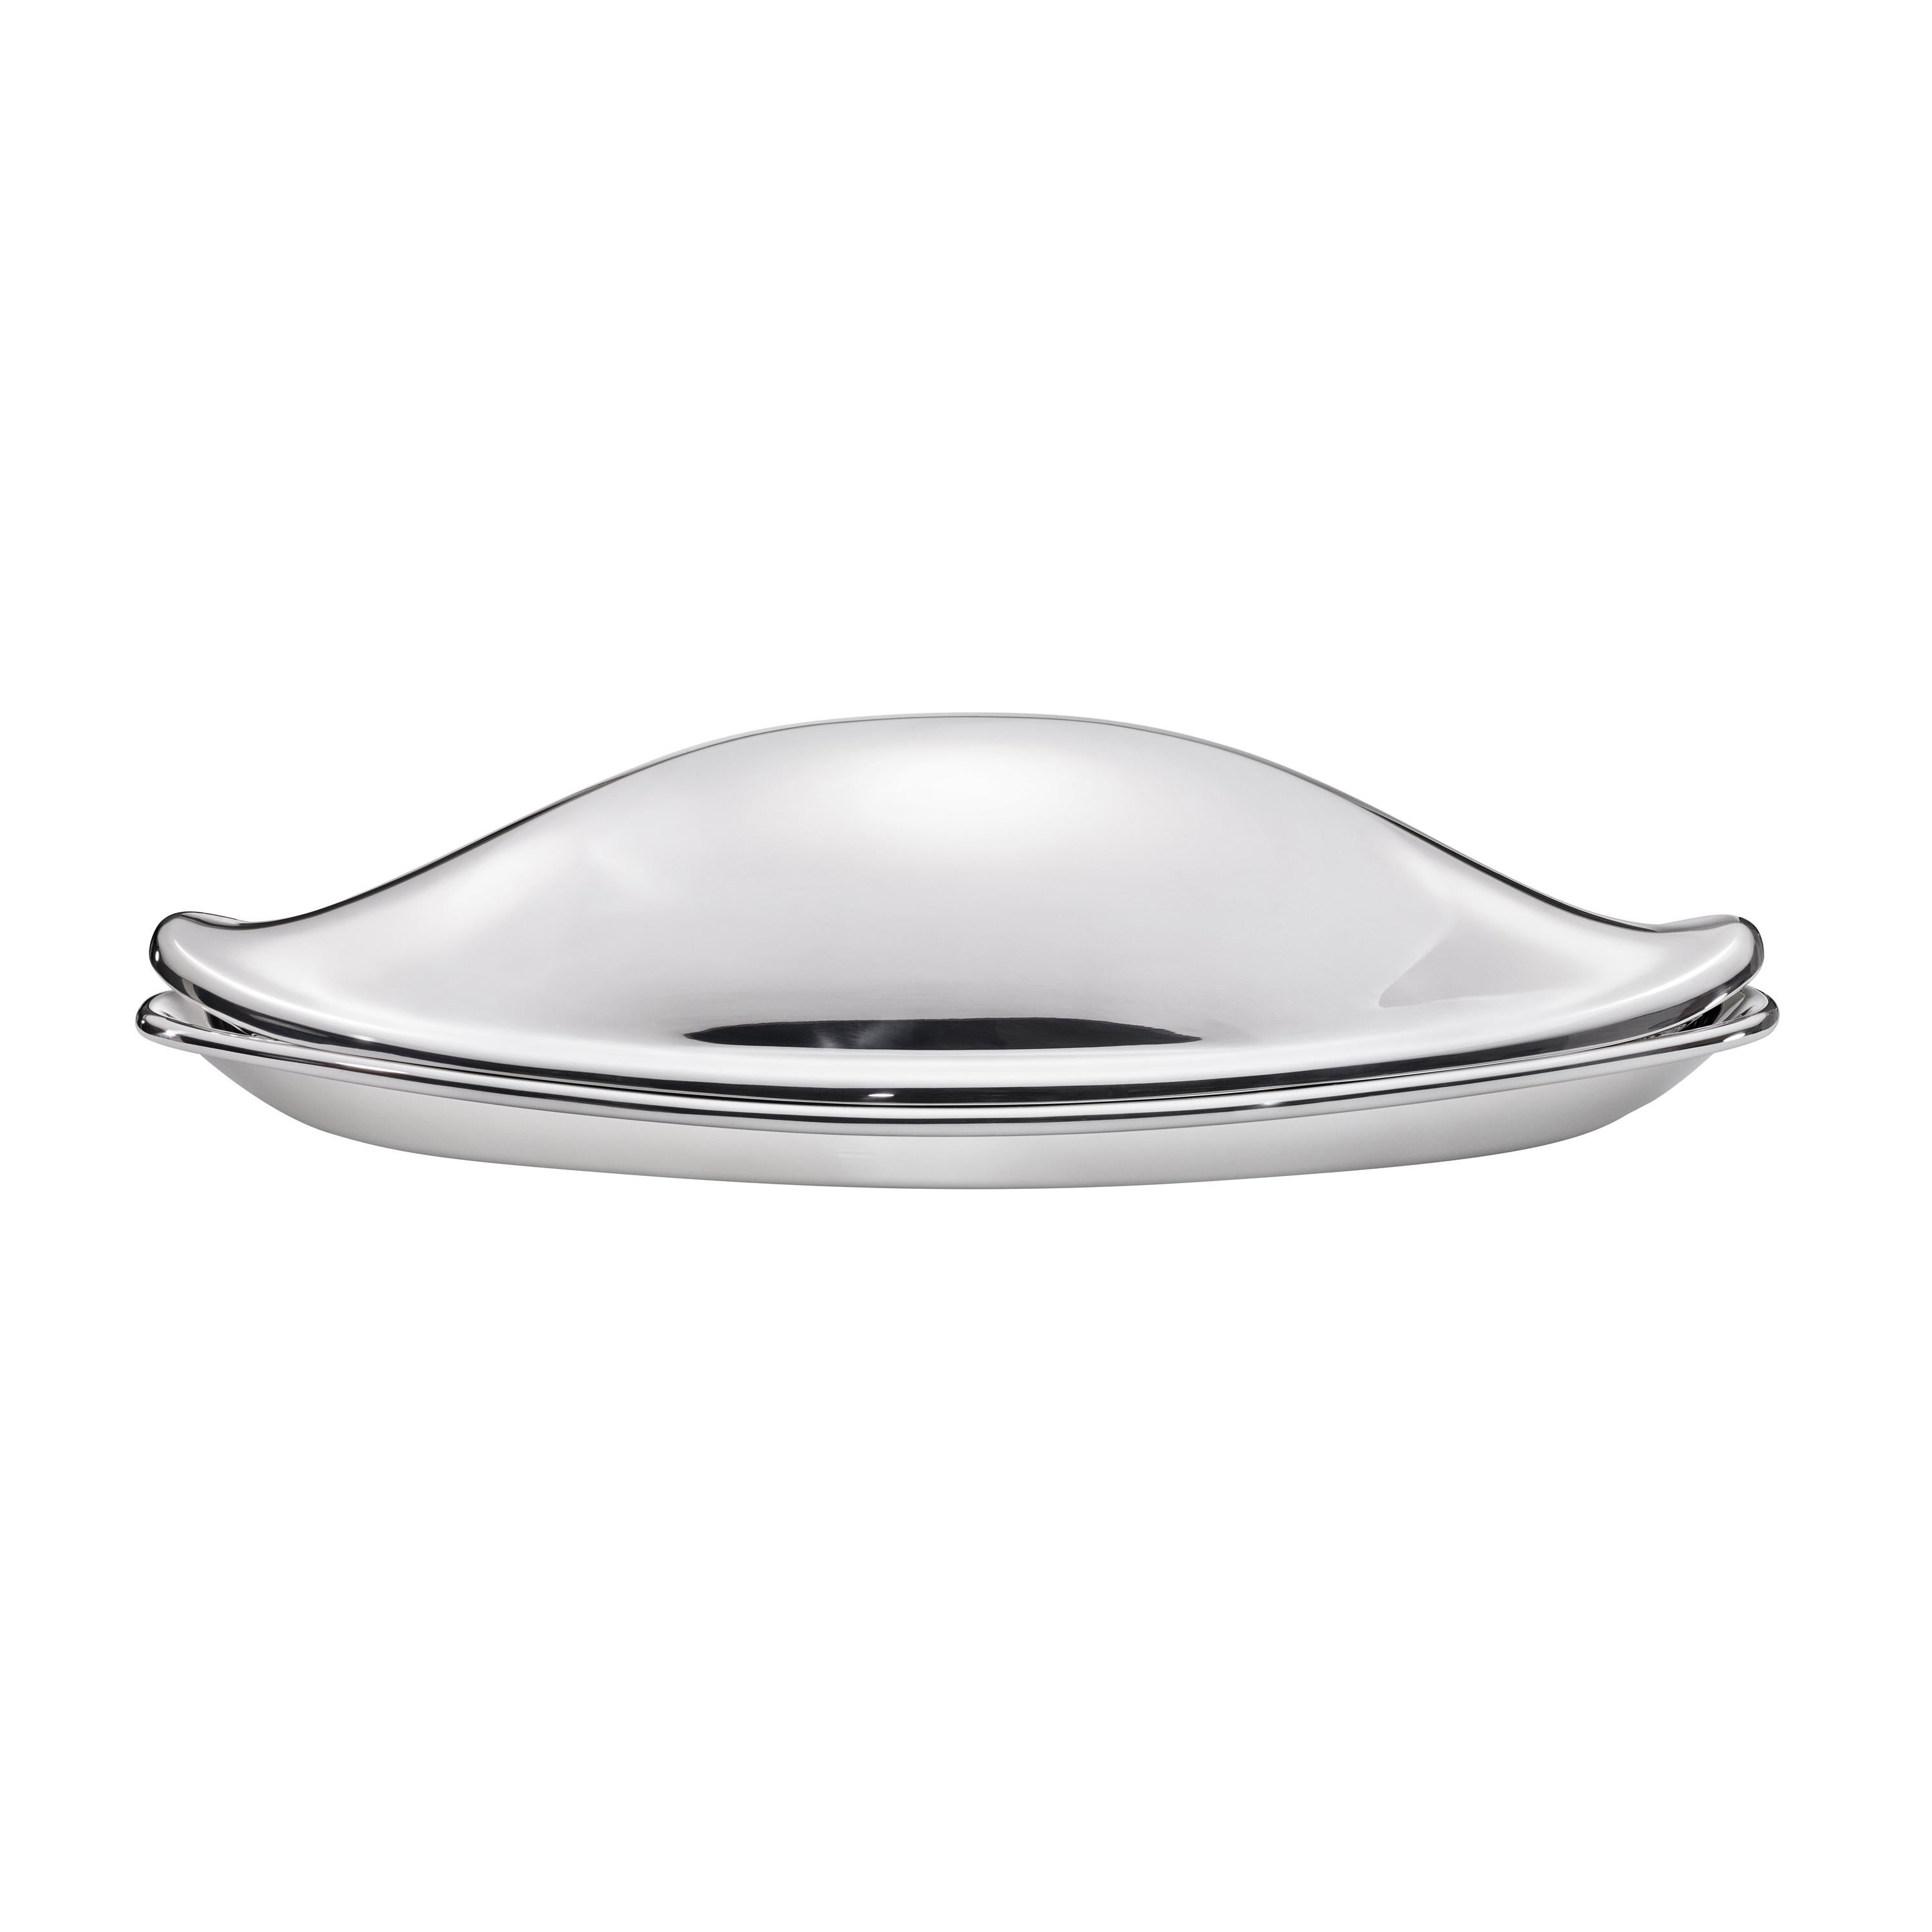 Henning Koppel 1026 Sterling Silver Fish Platter with Cover for Georg Jensen For Sale